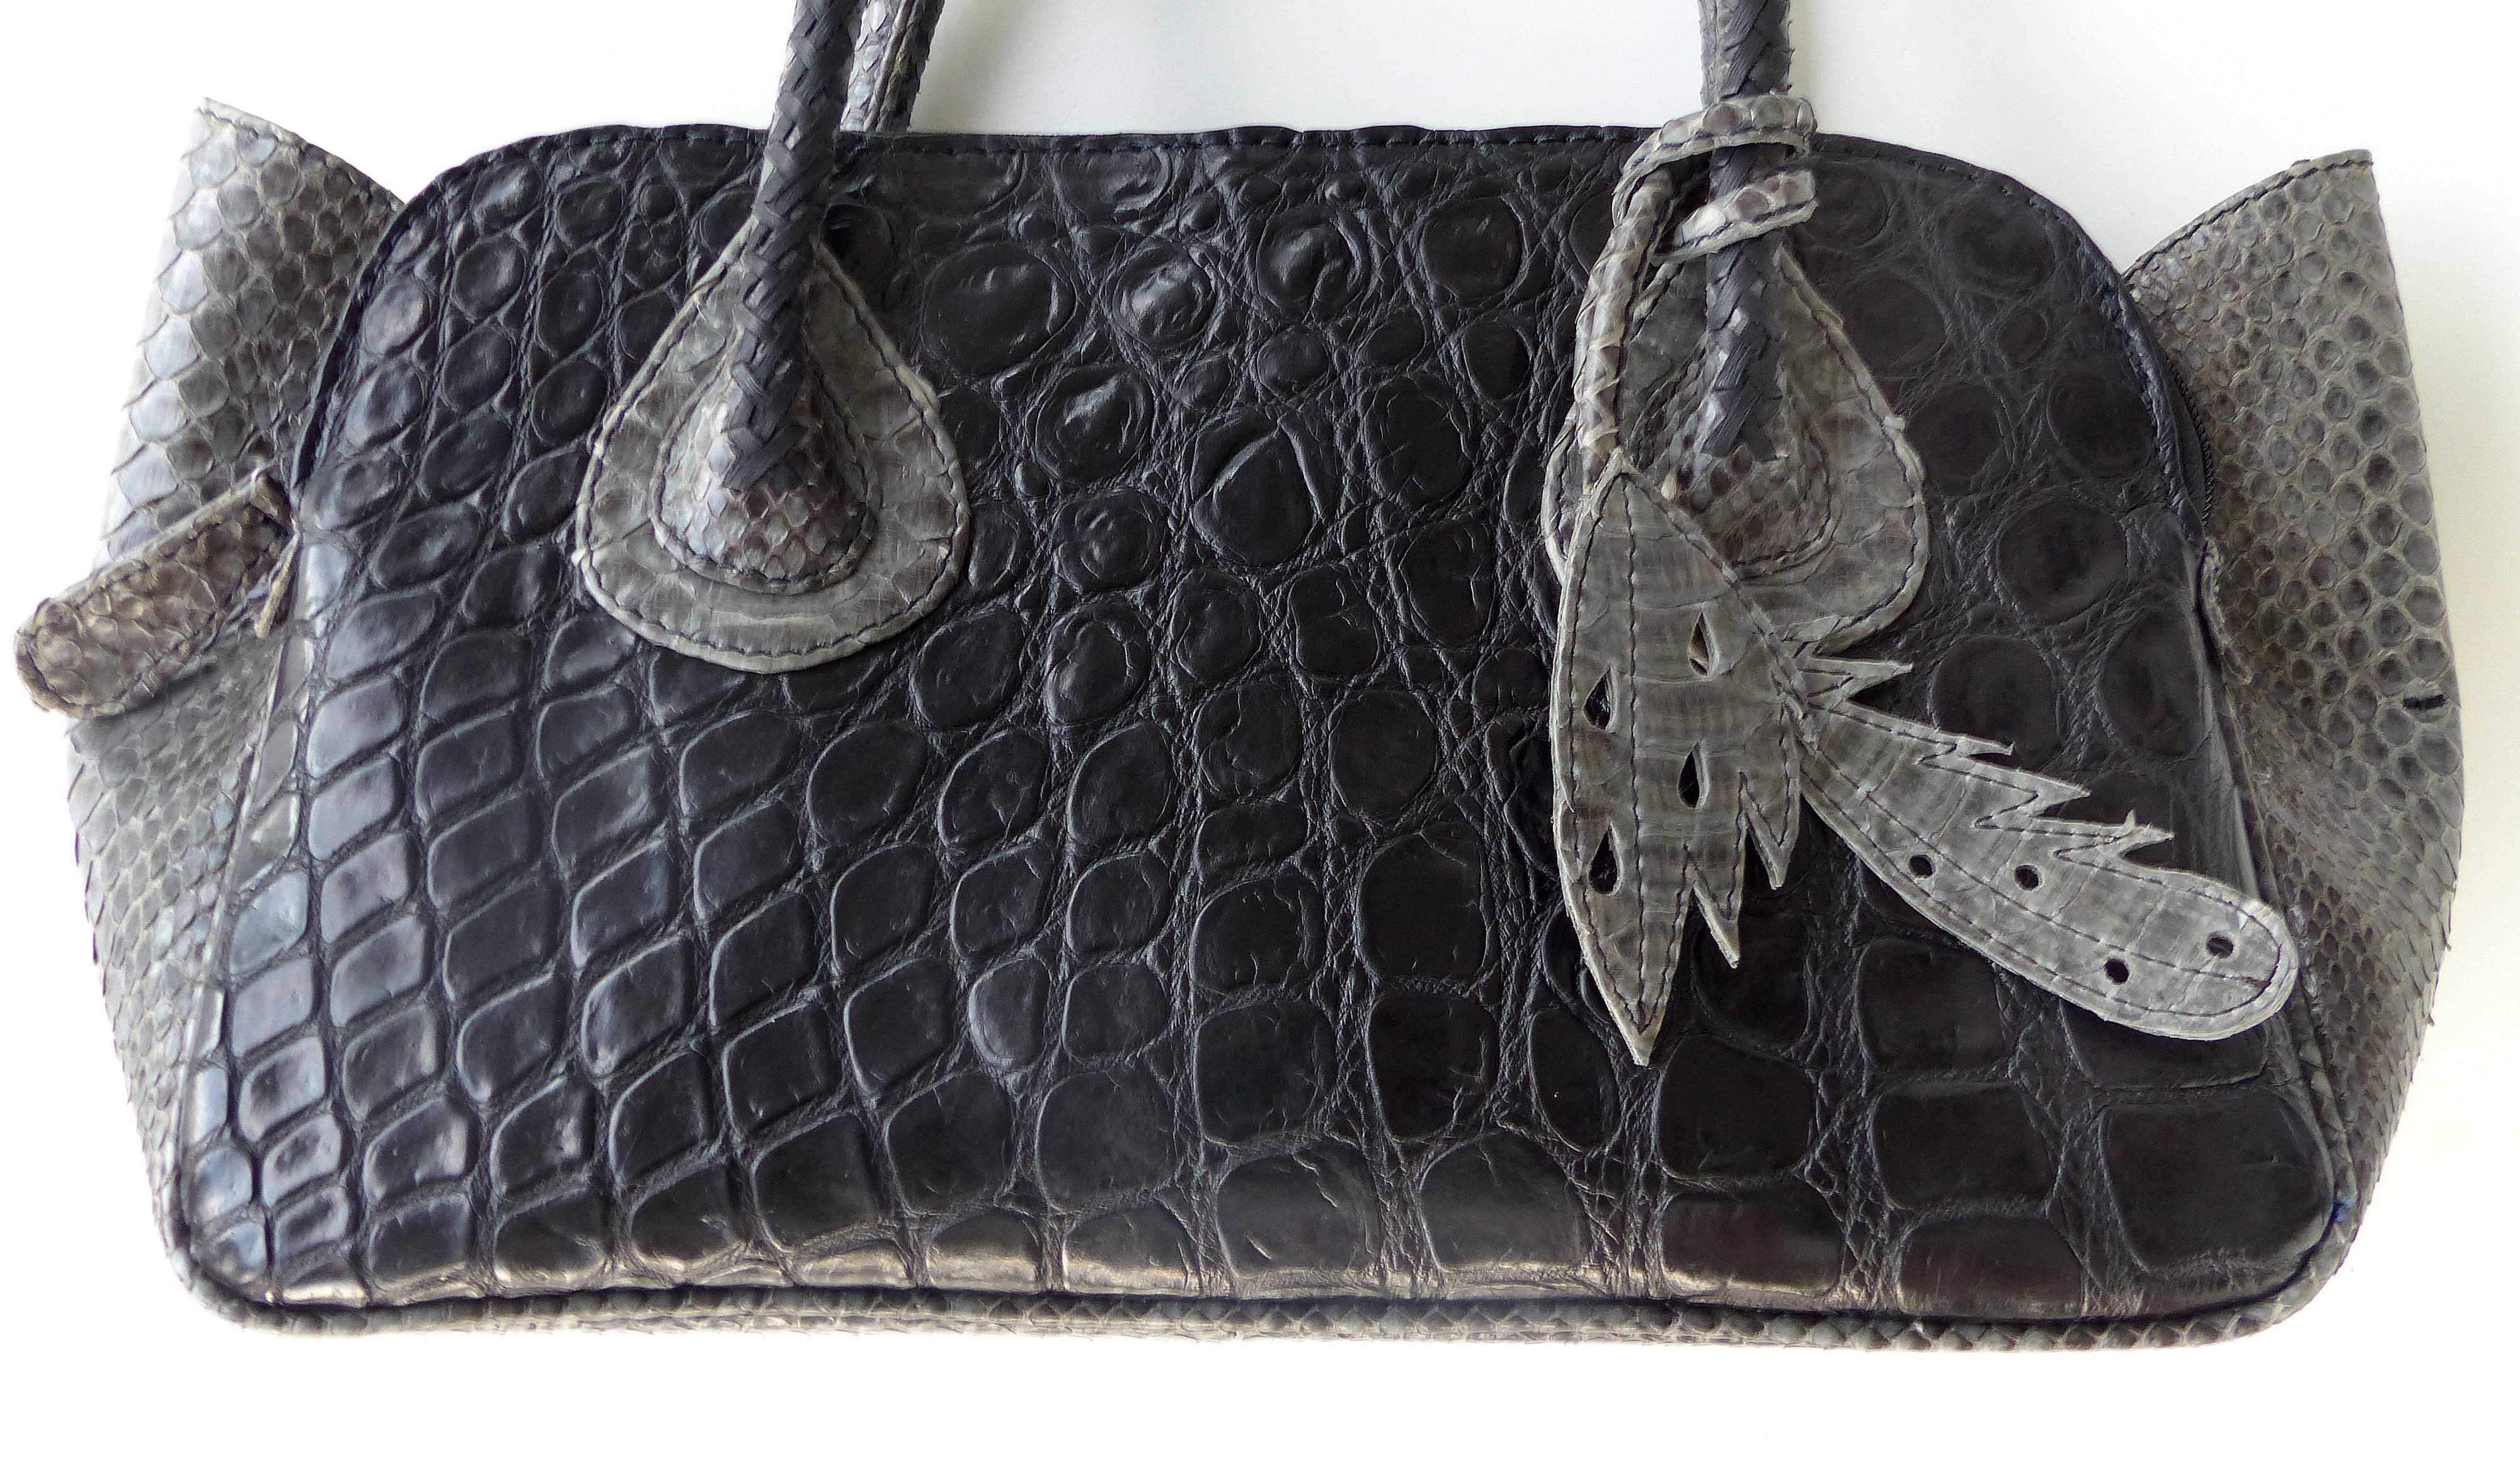 

Offered for sale is the smaller version of the "It" bag in black salt water crocodile and gray rubberized python side panels and details. Designed by Glen Arthur from his workshop in Bali, Indonesia for GaBag Co. This wonderful bag is